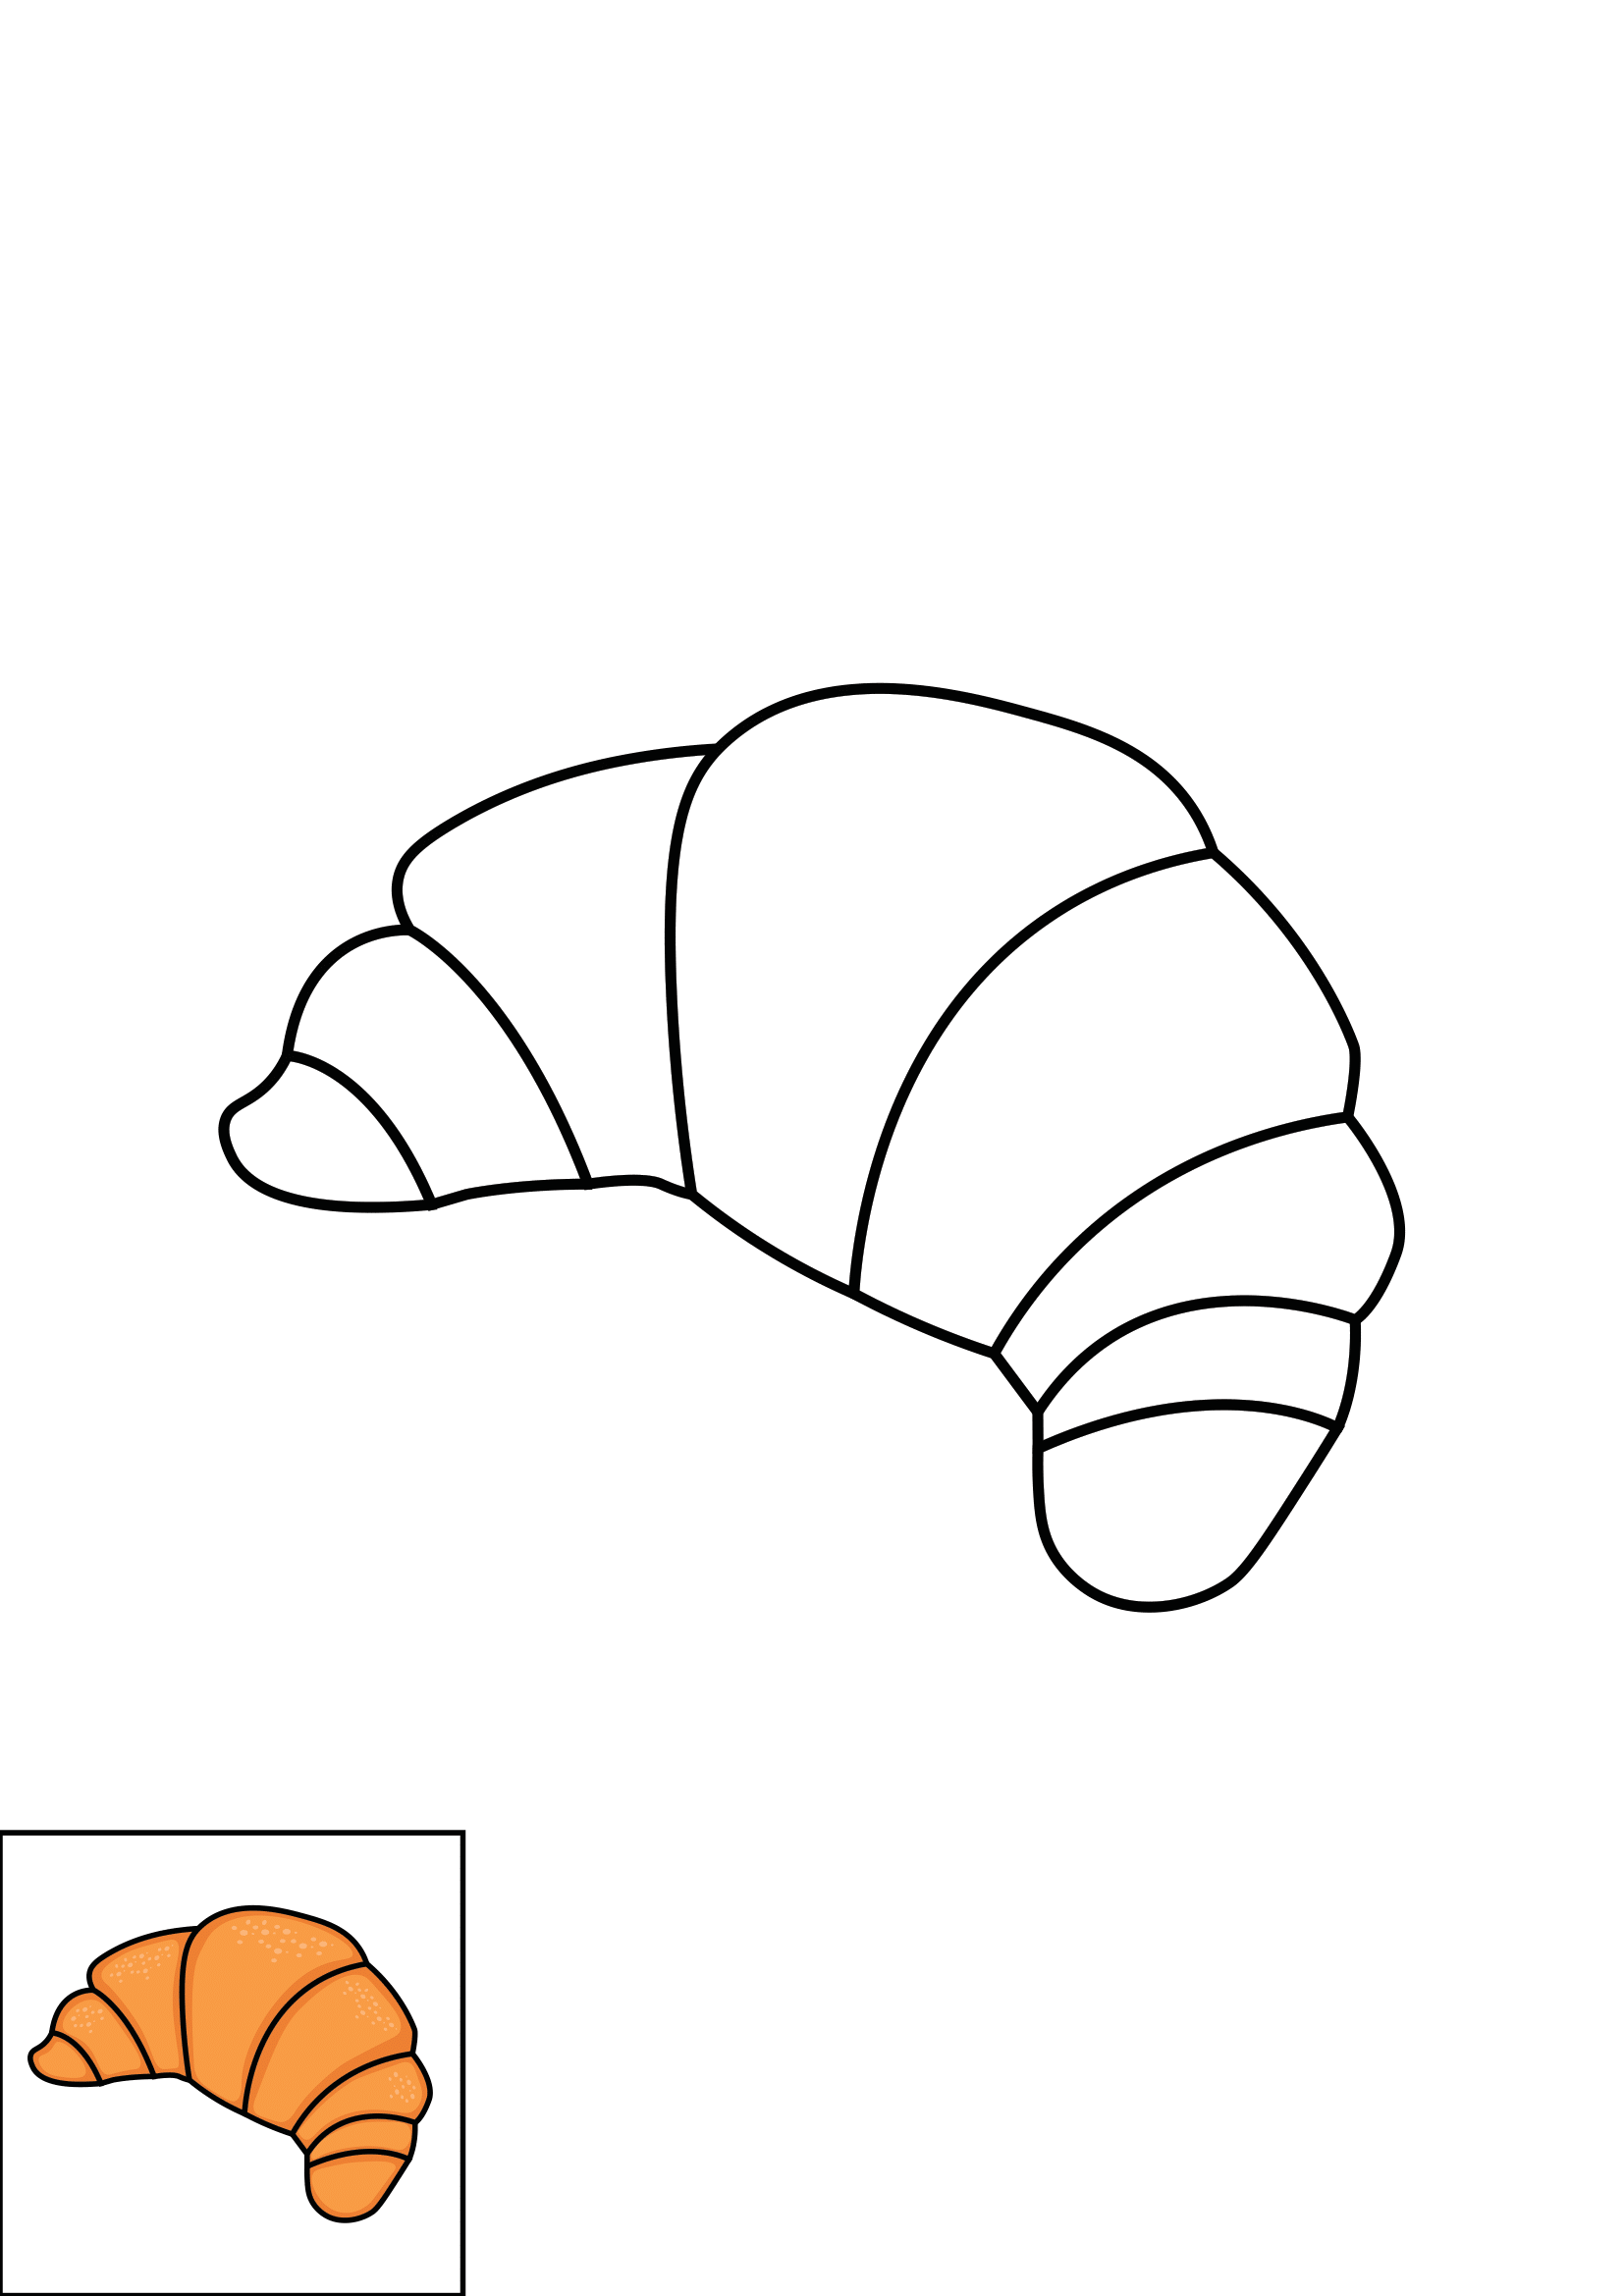 How to Draw A Croissant Step by Step Printable Color